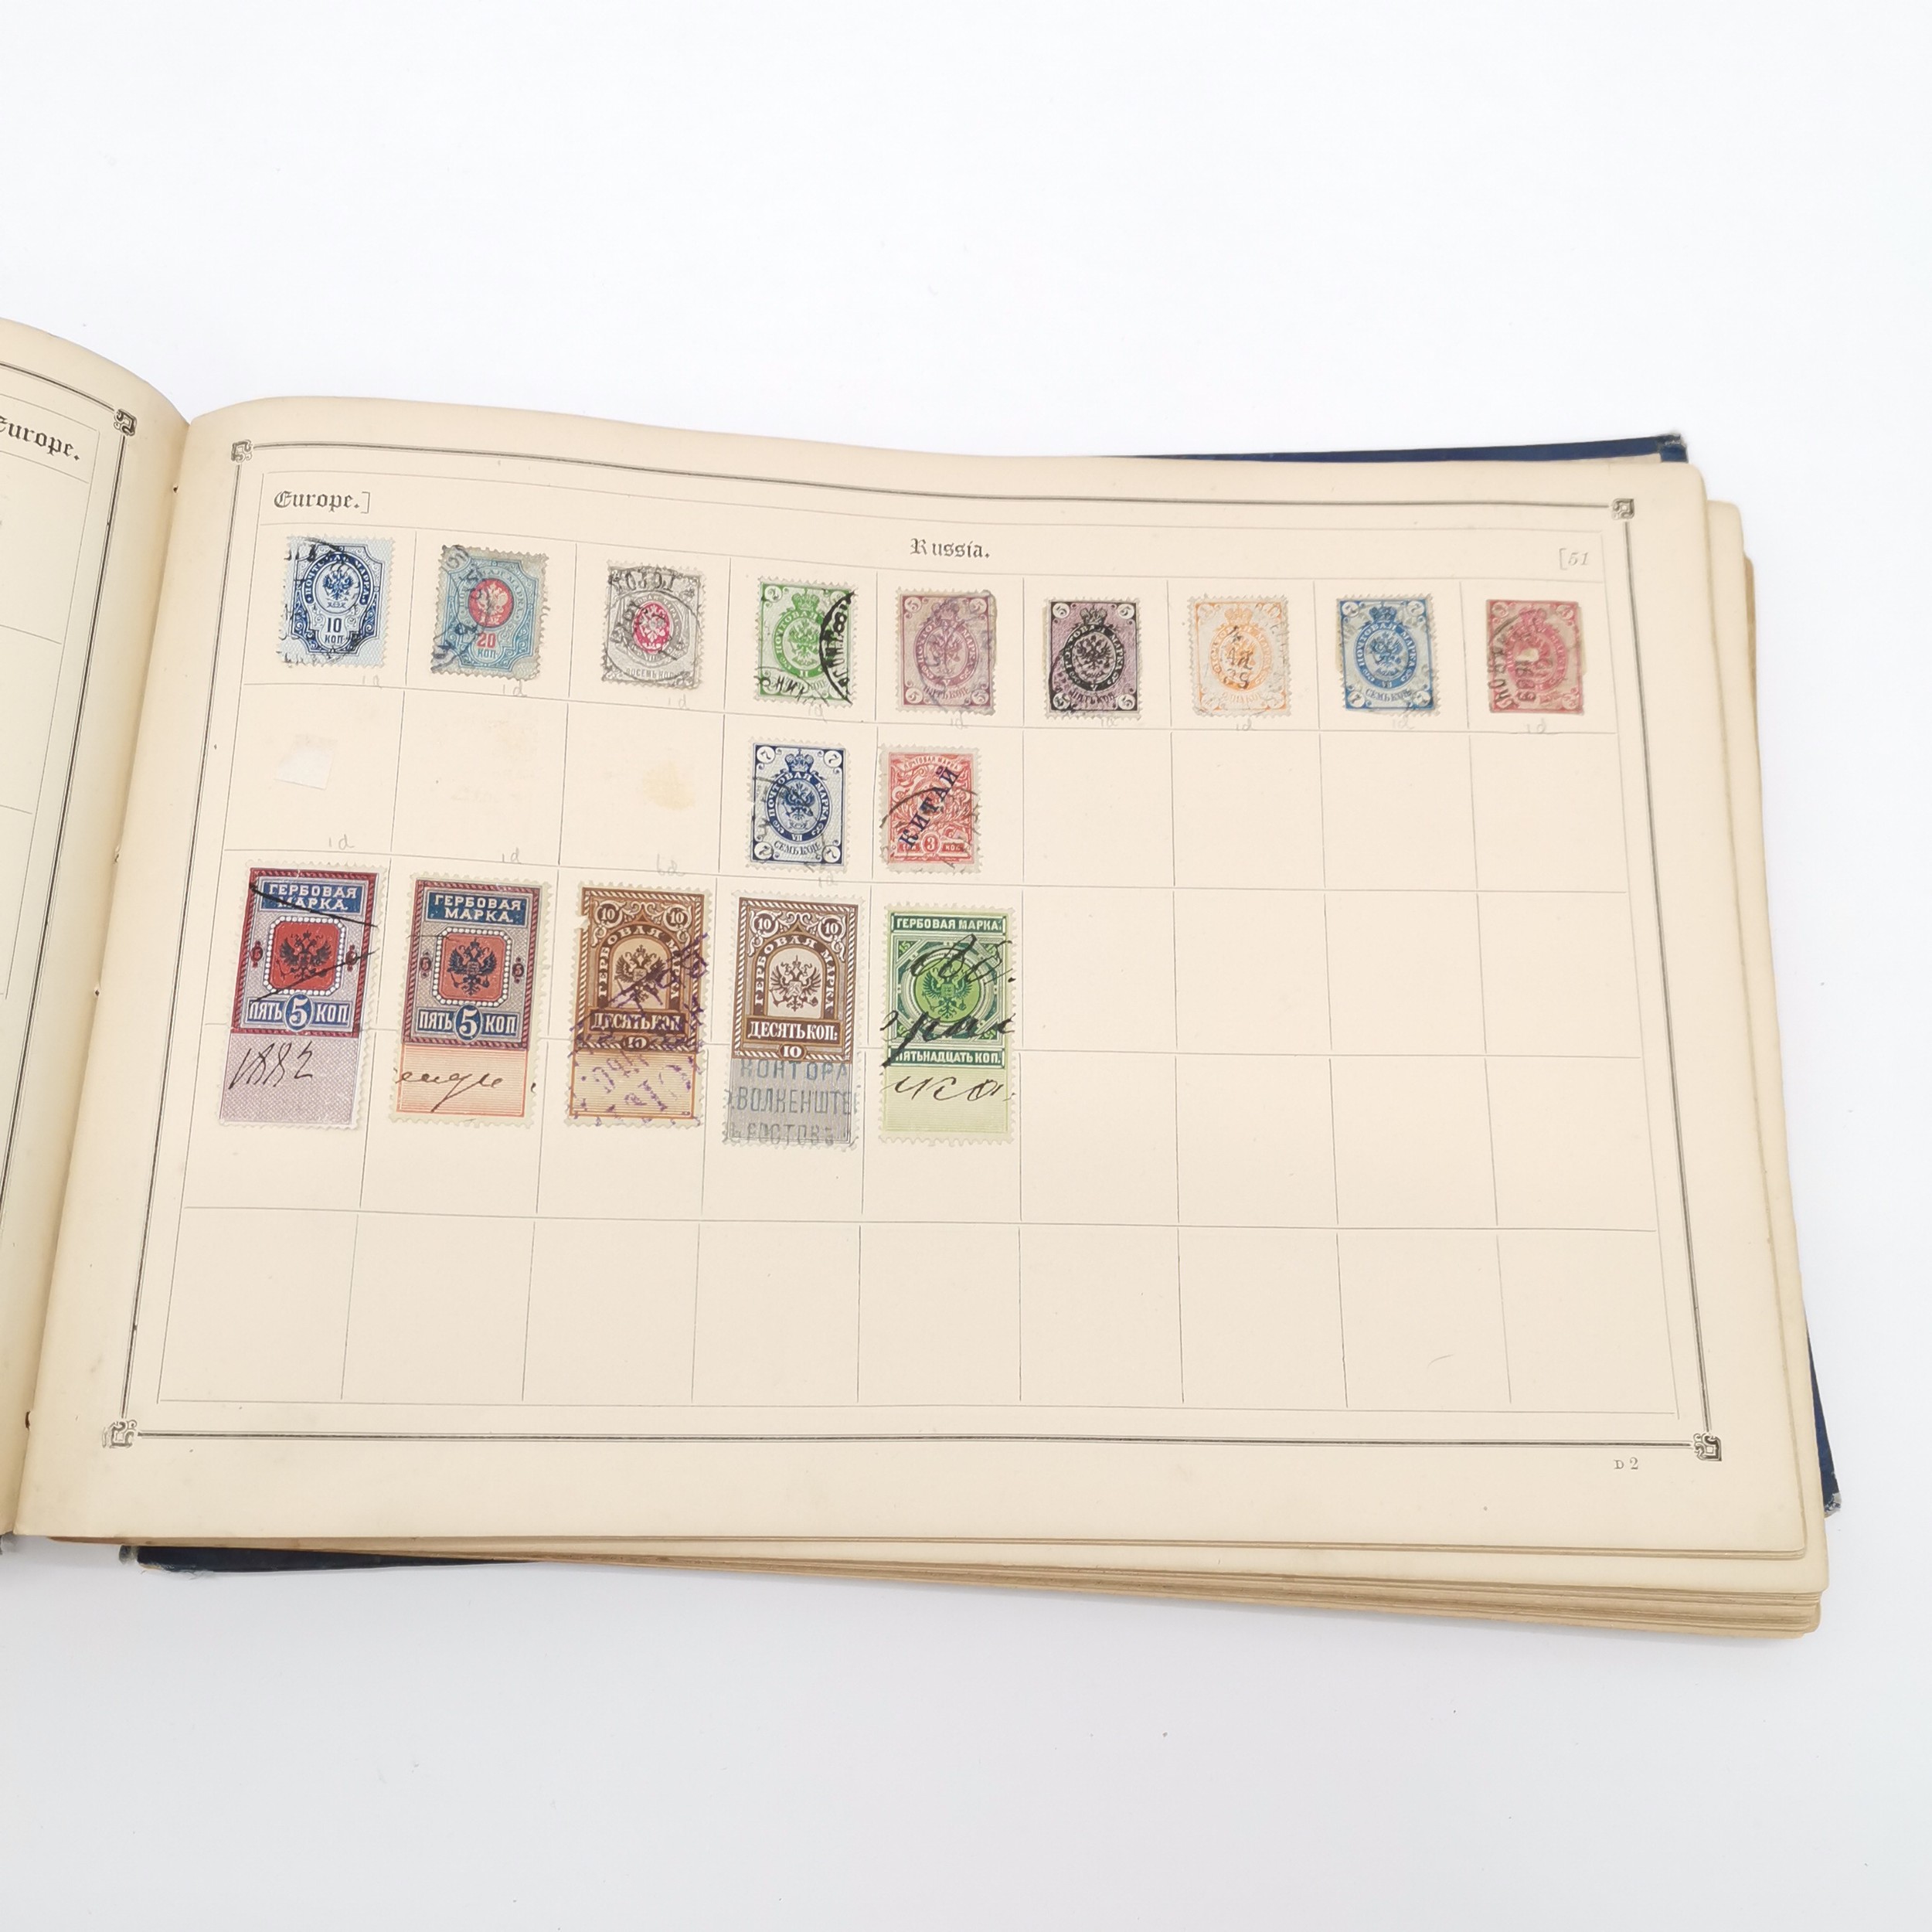 Cosmopolitan postage stamp album with useful collection inc GB 1d penny black, China dragon stamps & - Image 8 of 26